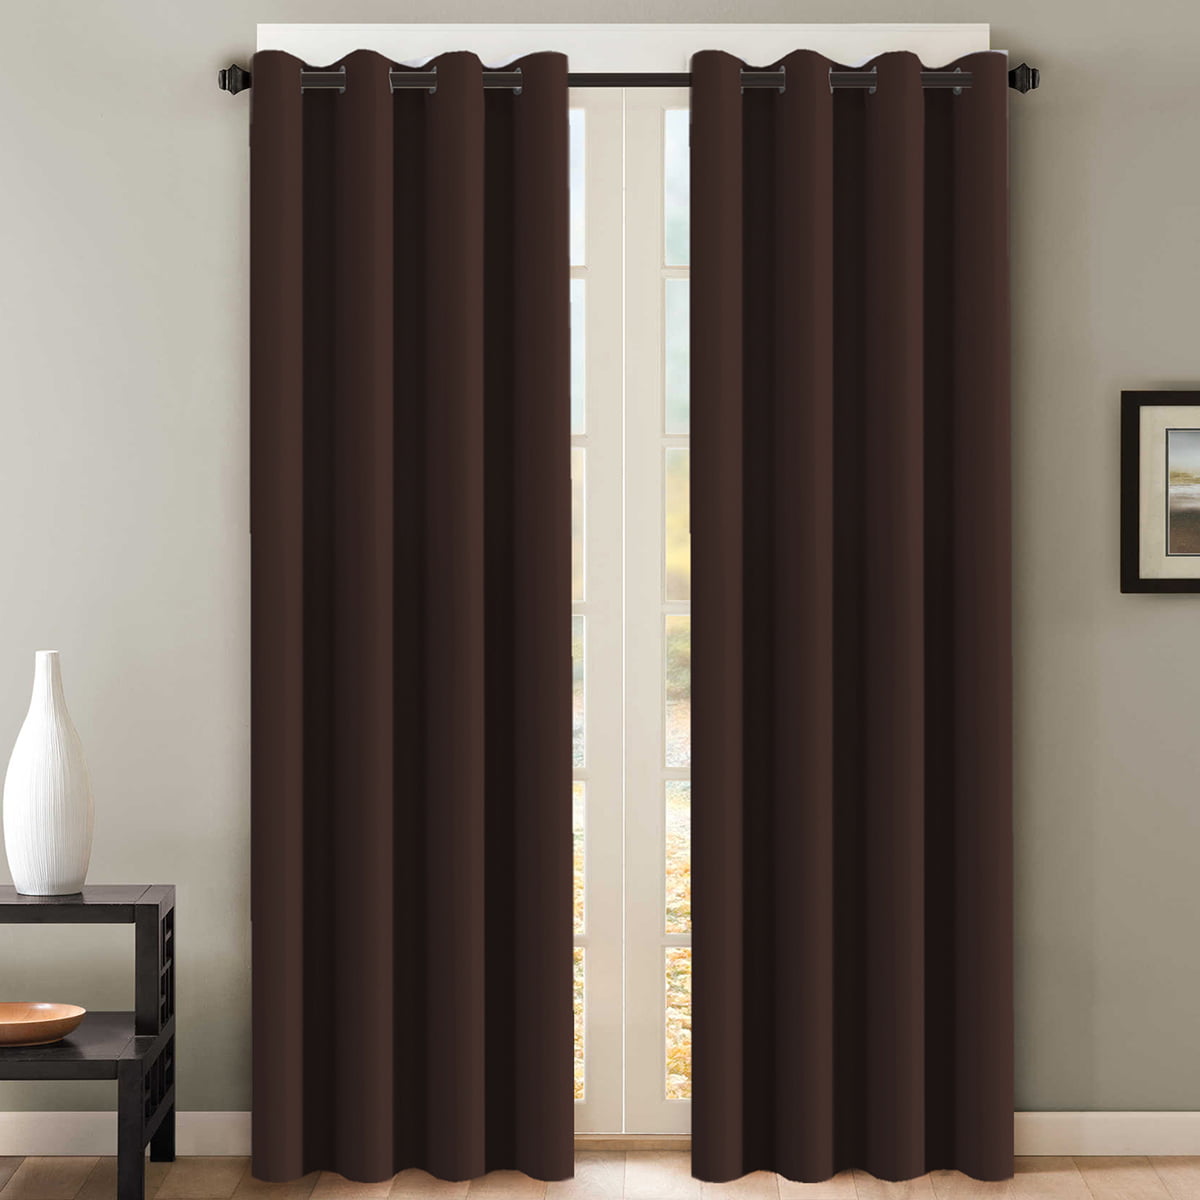 2 Panels Blackout Curtains Top with Magic Stickers Tieback No Need for Poles